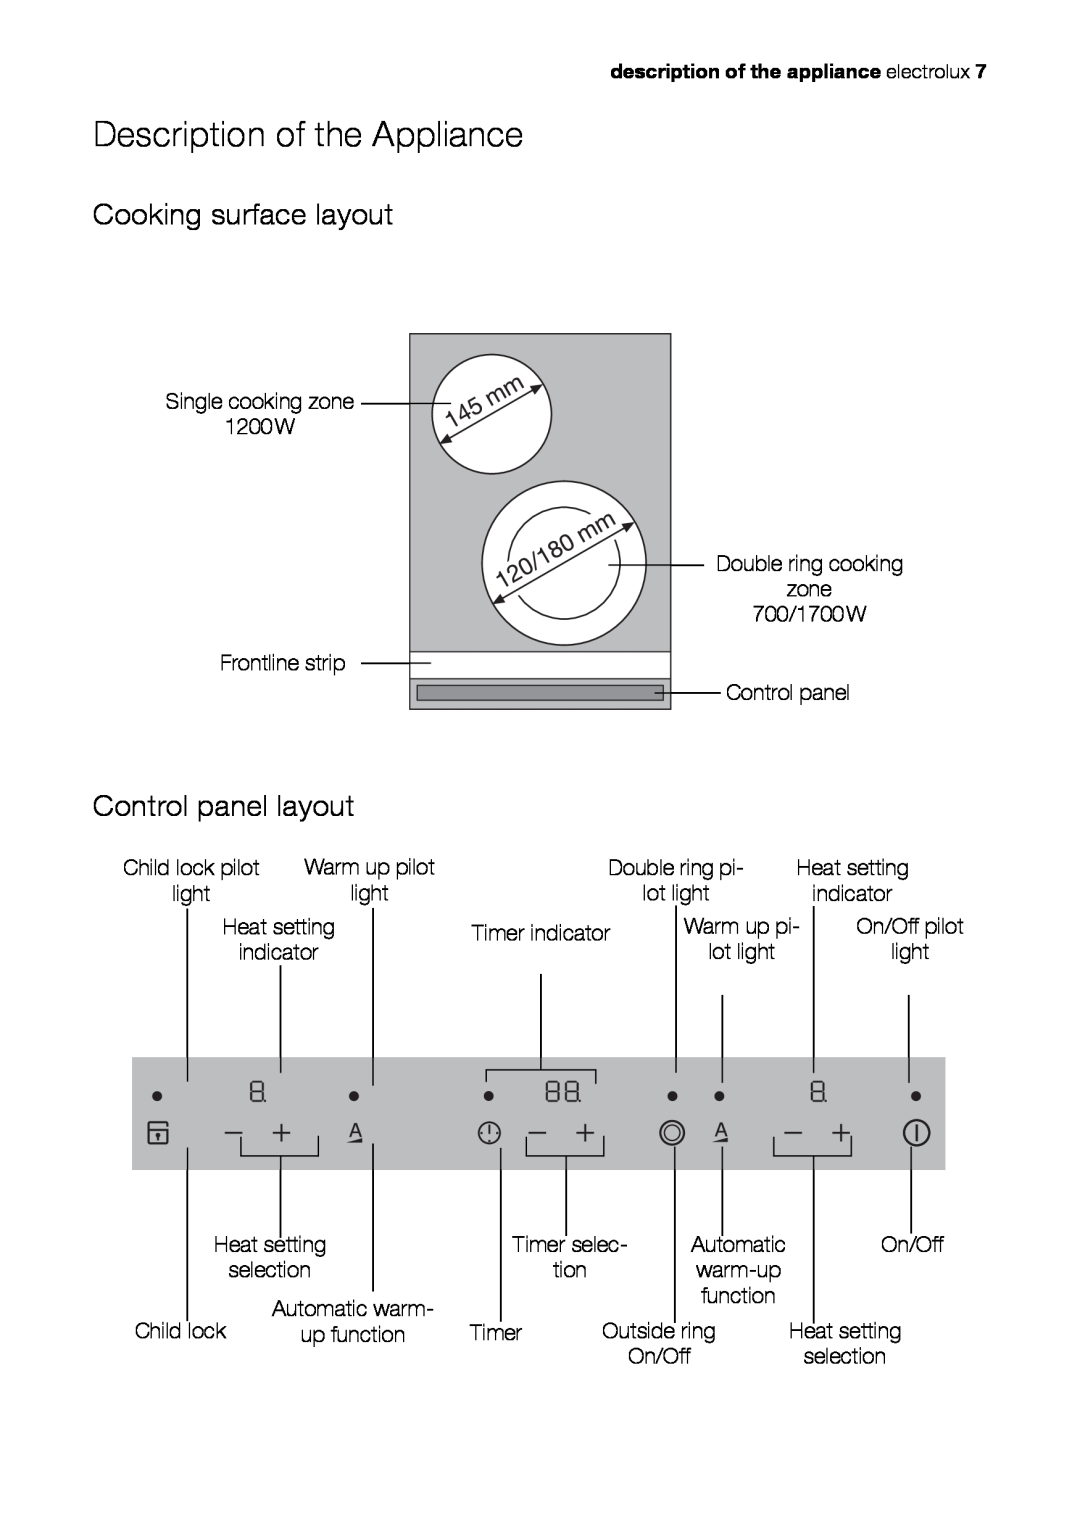 Electrolux EHS 36020 U user manual Description of the Appliance, Cooking surface layout, Control panel layout 